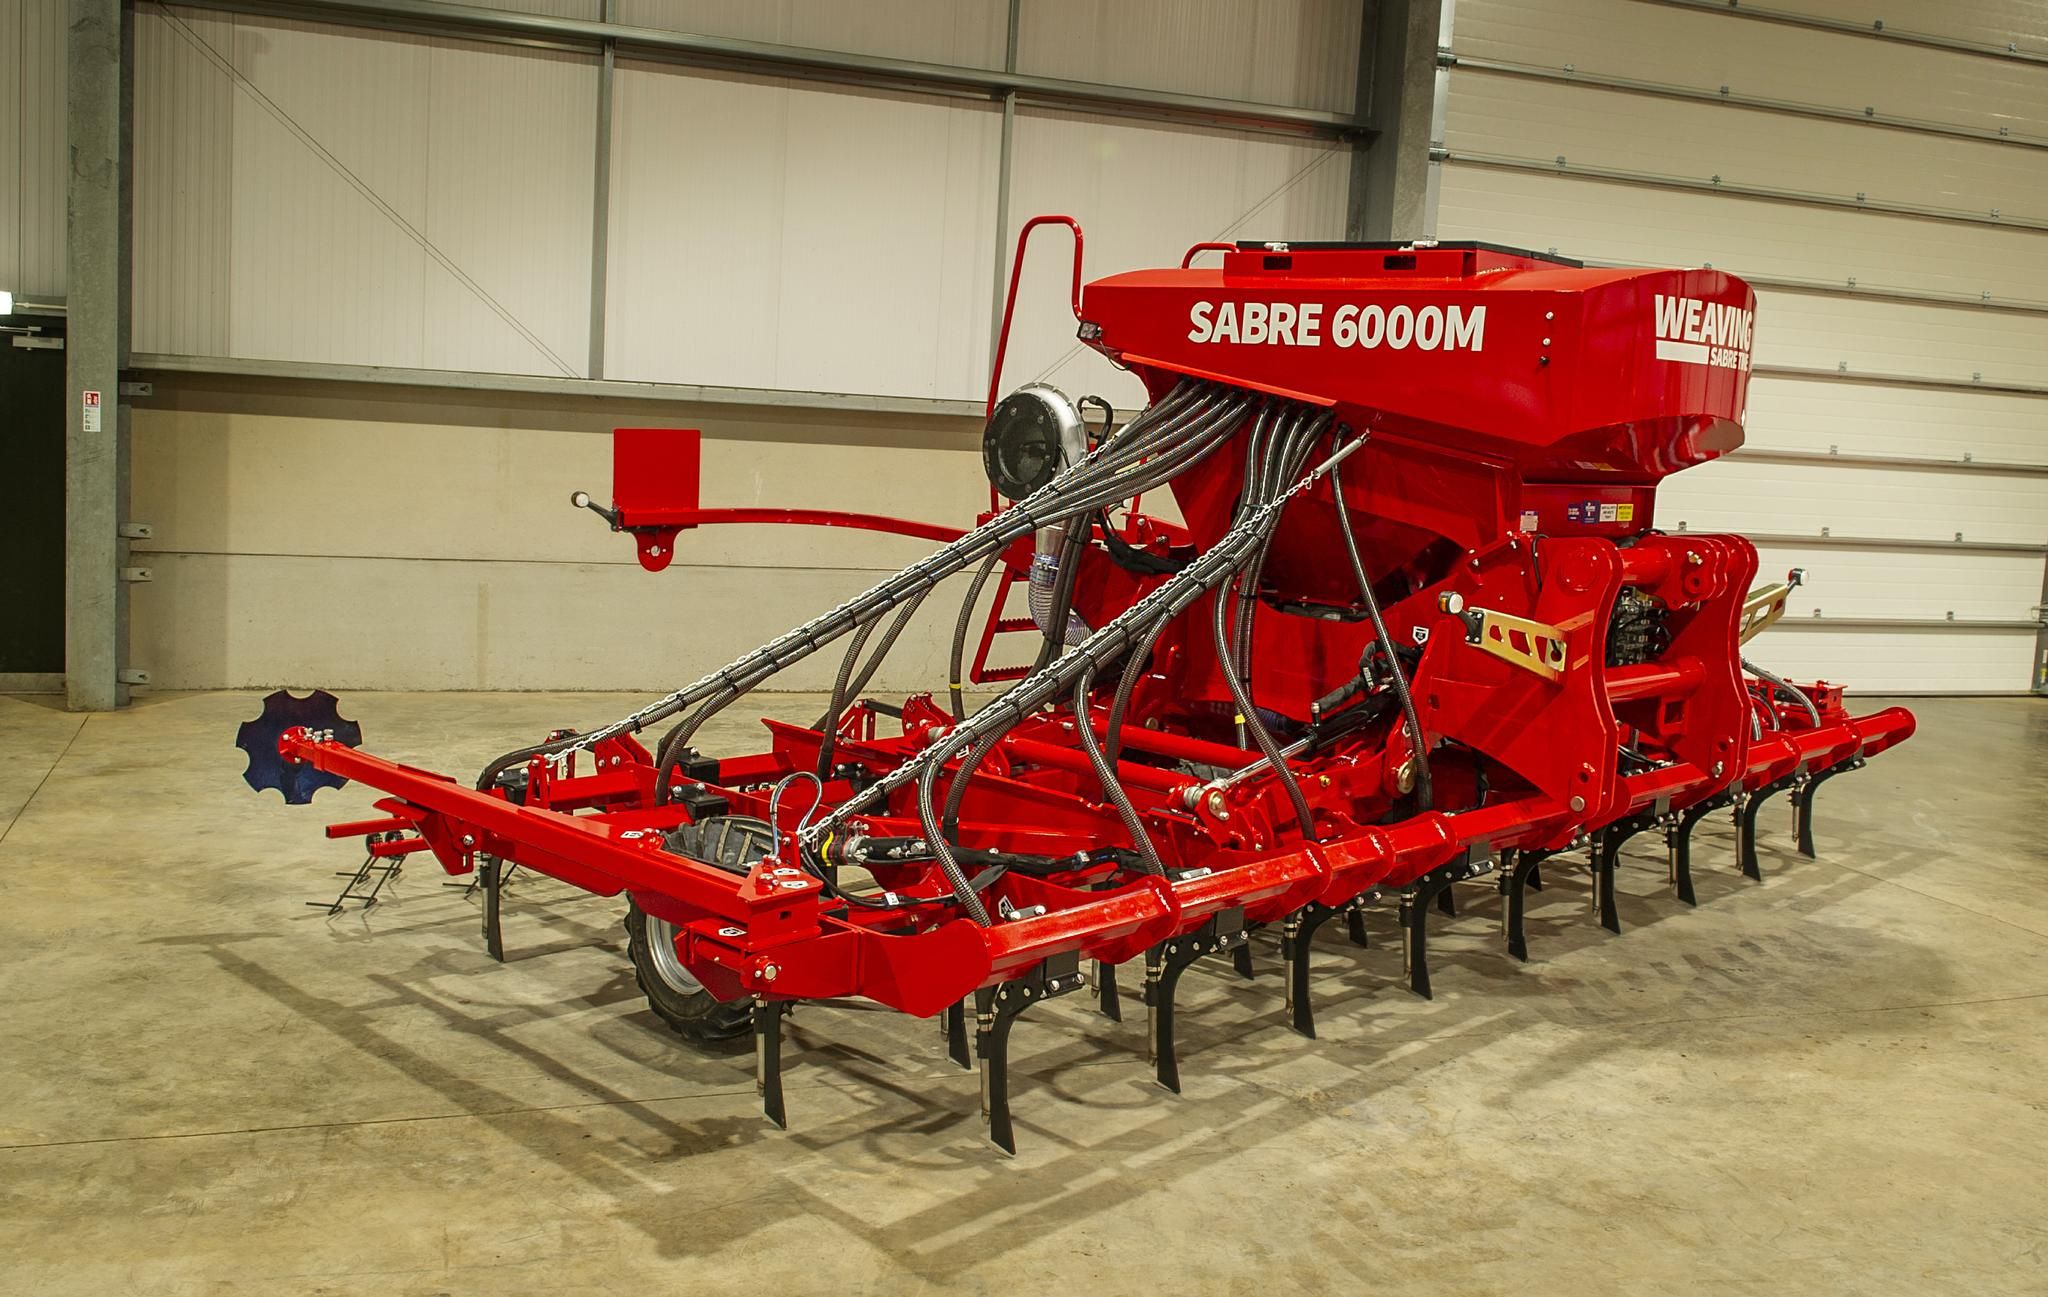 Weaving Machinery to launch next generation Sabre Tine Drill at LAMMA 20